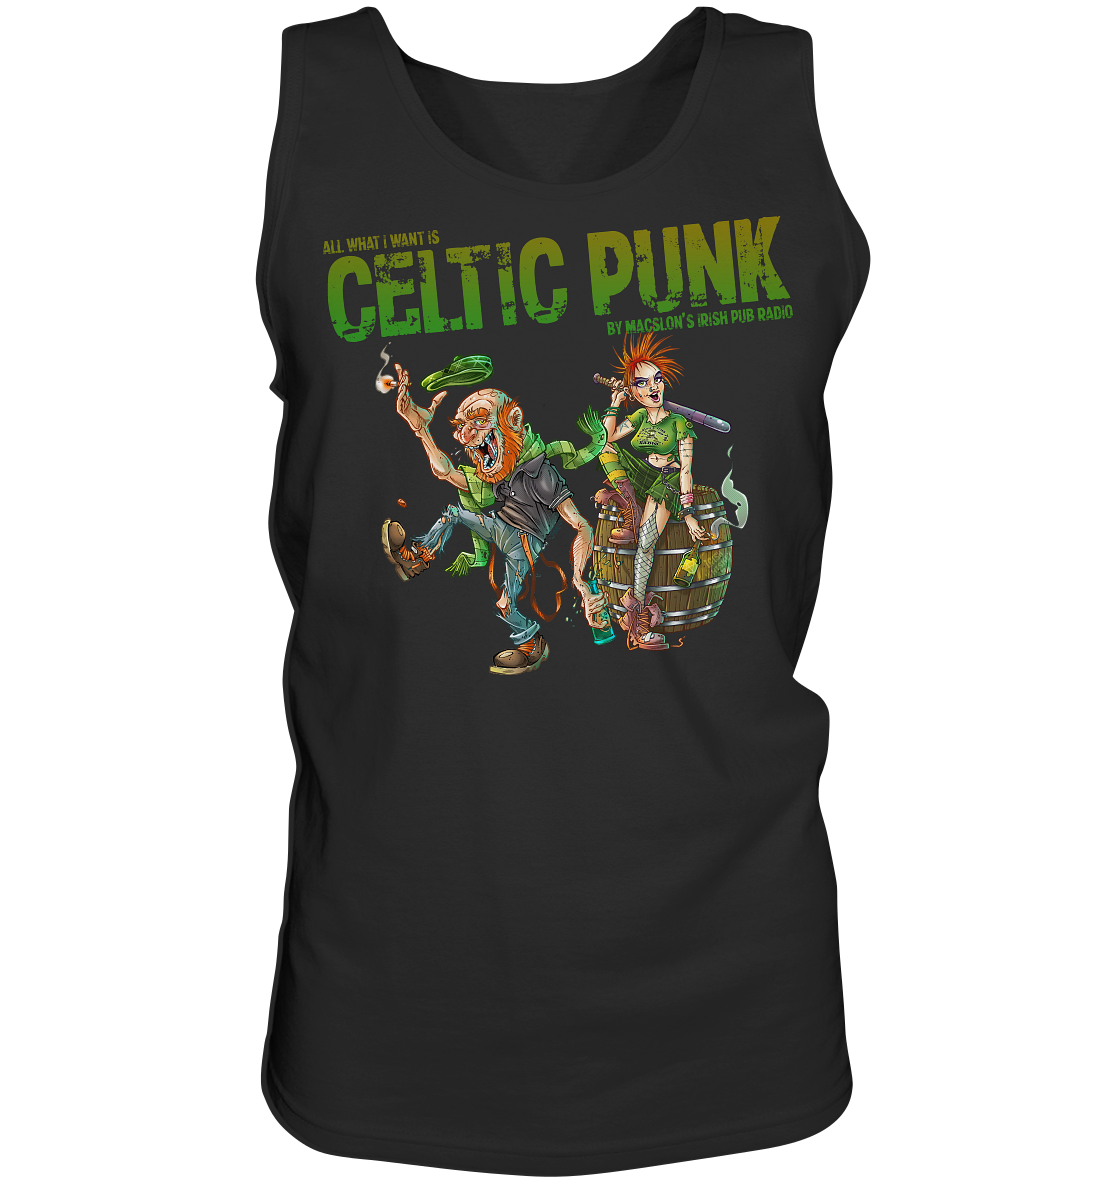 All What I Want Is "Celtic Punk" - Tank-Top